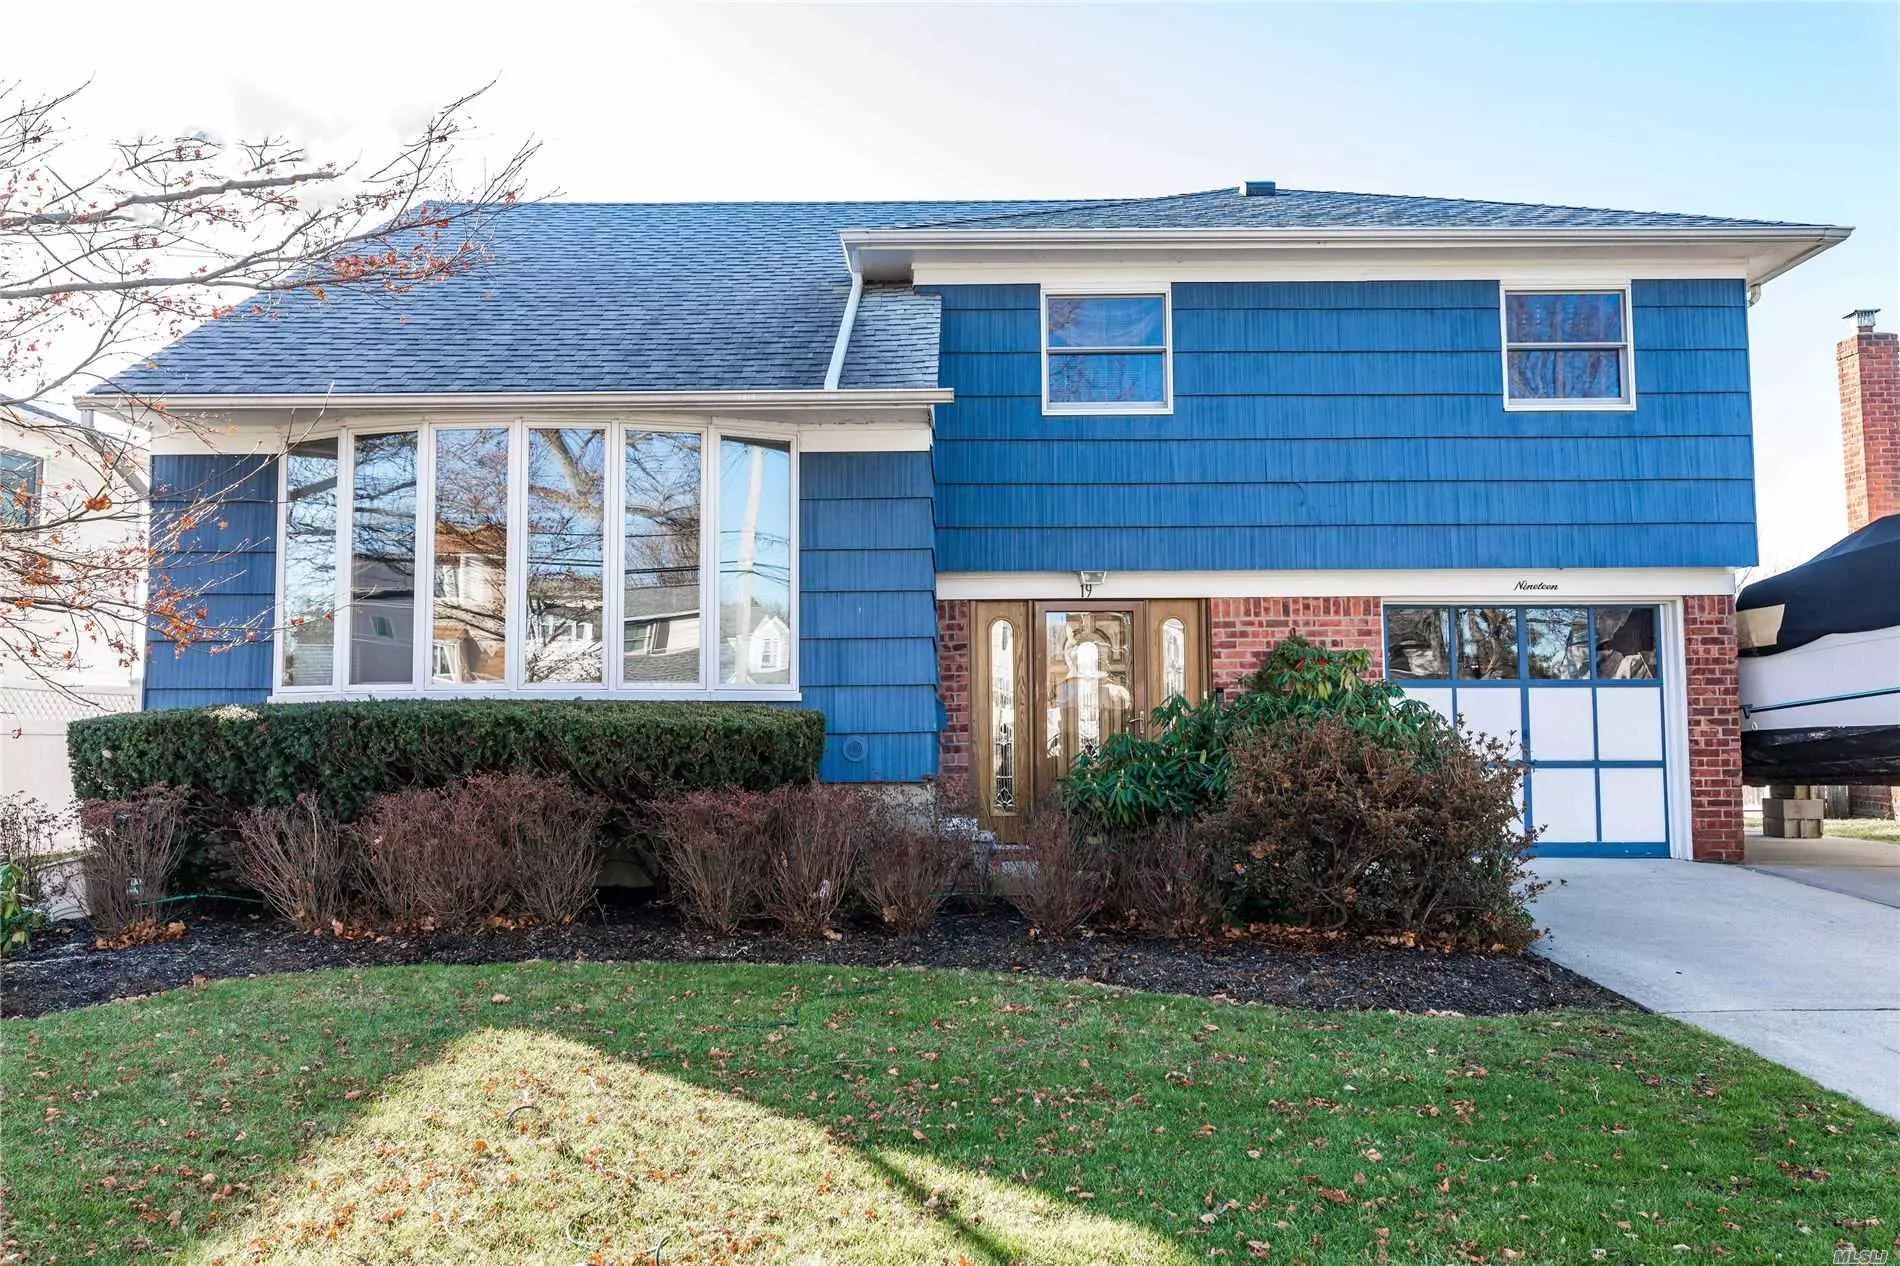 4 Bedrooms, 3 Full Baths In This 5 Level Split. House Features Living Room, Dining Room, Eat-In Kitchen, Den, Finished Basement, 3 Bedrooms And Master bedroom Suite, 1 Car Garage. This House Does Not Need Flood Insurance.